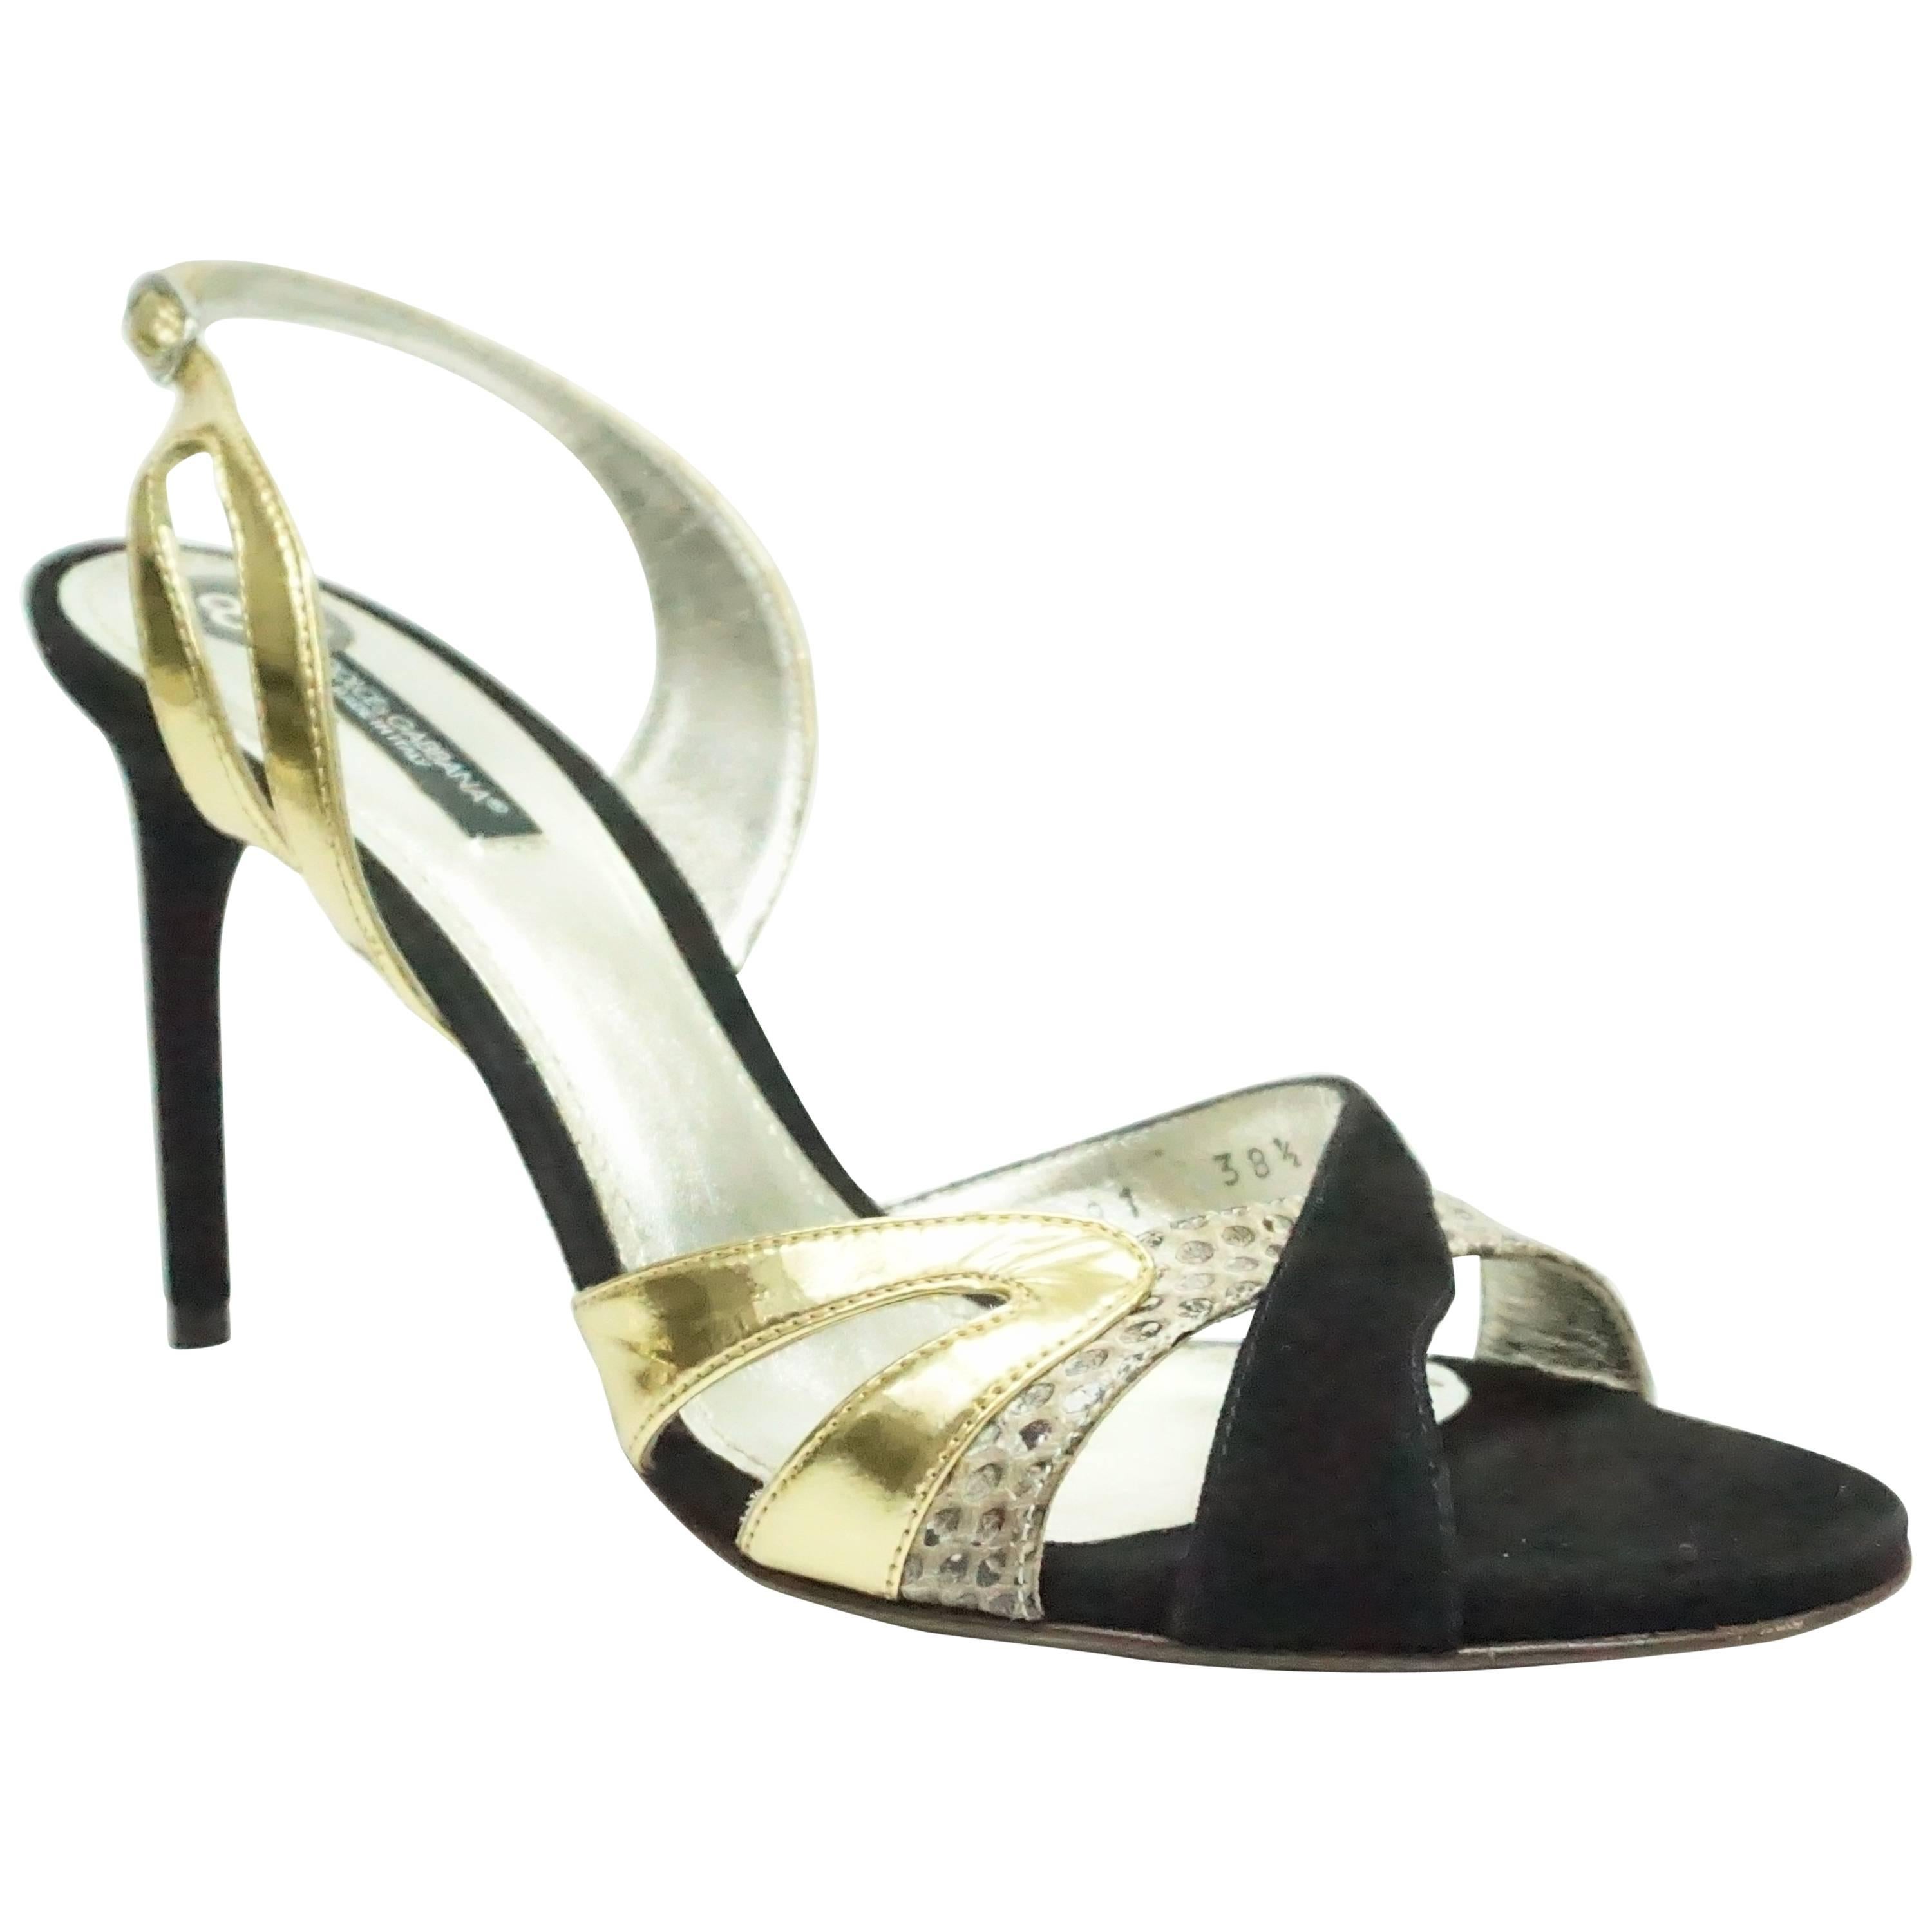 Dolce & Gabbana Black Suede Slingback w/ Gold Leather and Snakeskin - 38.5 